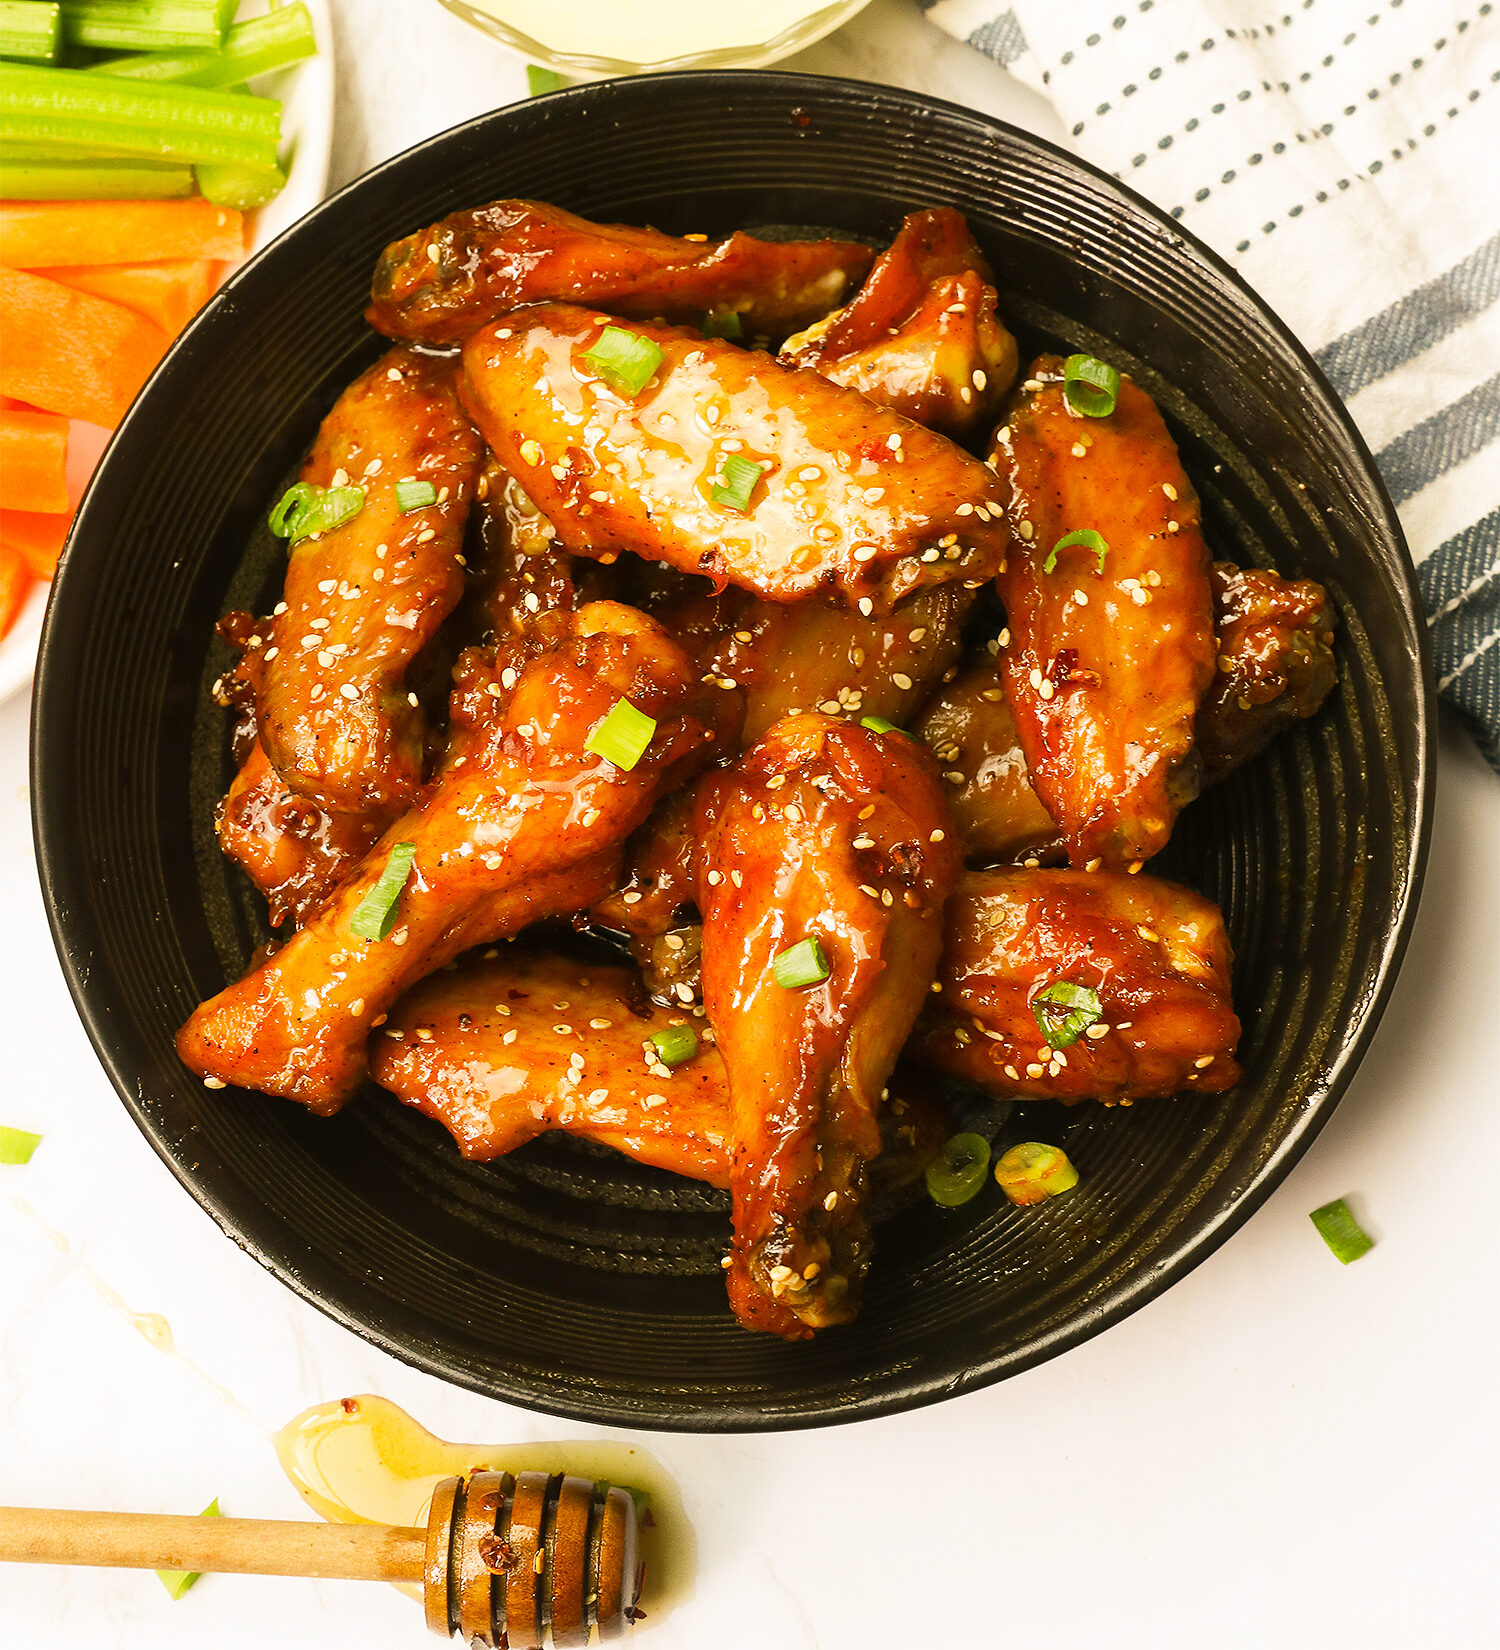 Mind-blowing honey hot wings with celery and carrot sticks and a delectable dipping sauce